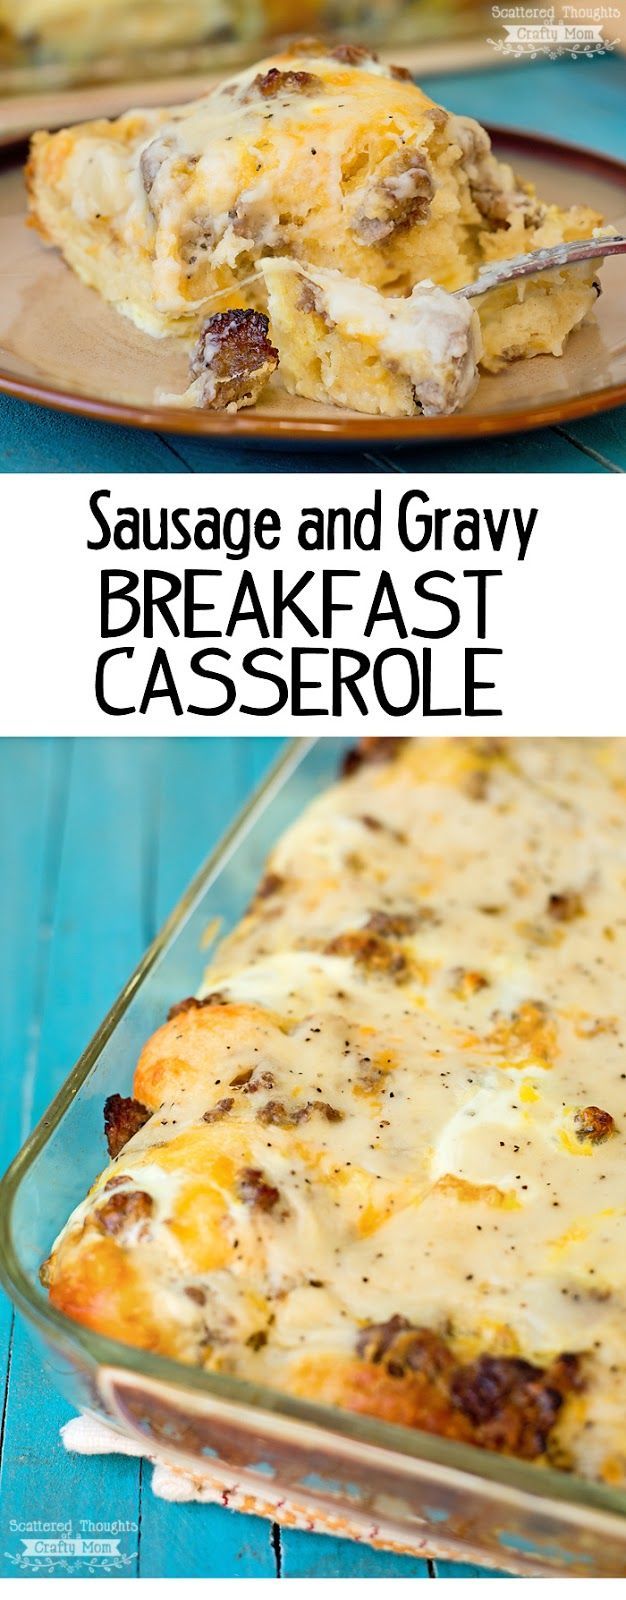 Sausage, Gravy and Biscuit Breakfast Casserole recipe. This breakfast dish is perfect to double for large groups and can be